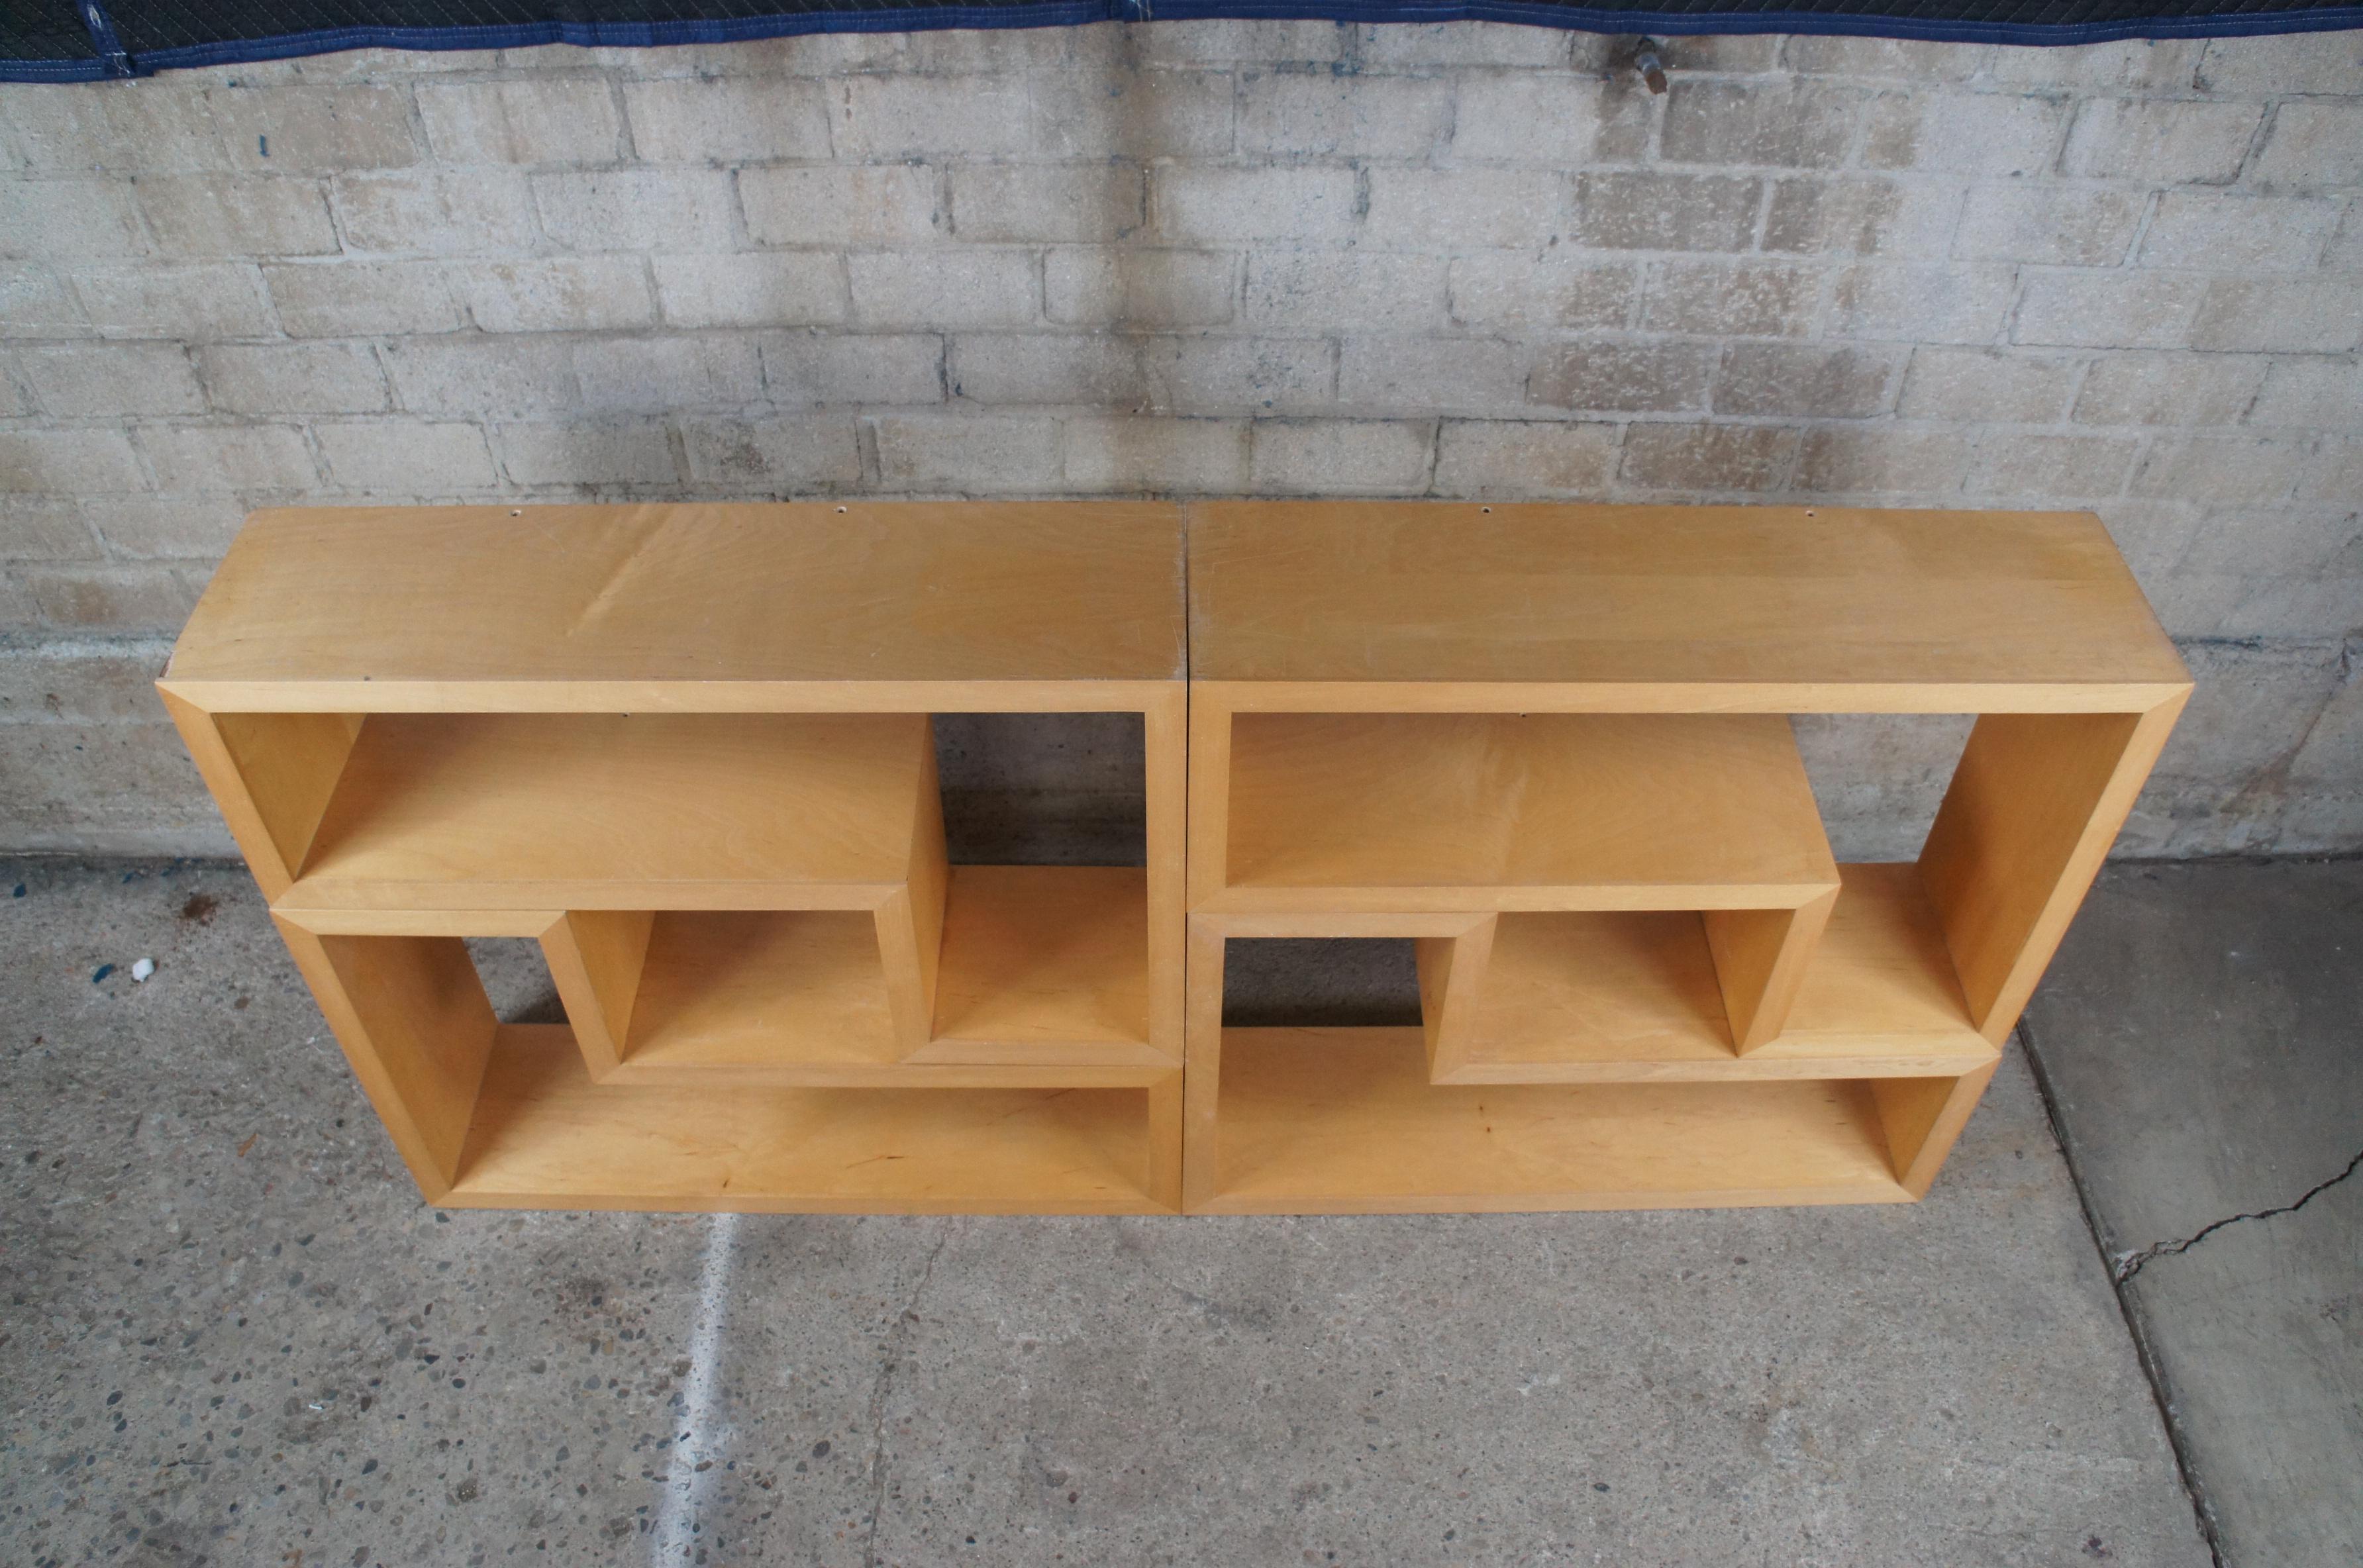 2 Mid-Century Modern Geometric Modular Maple Shelving Bookcases Console Etagere In Good Condition For Sale In Dayton, OH